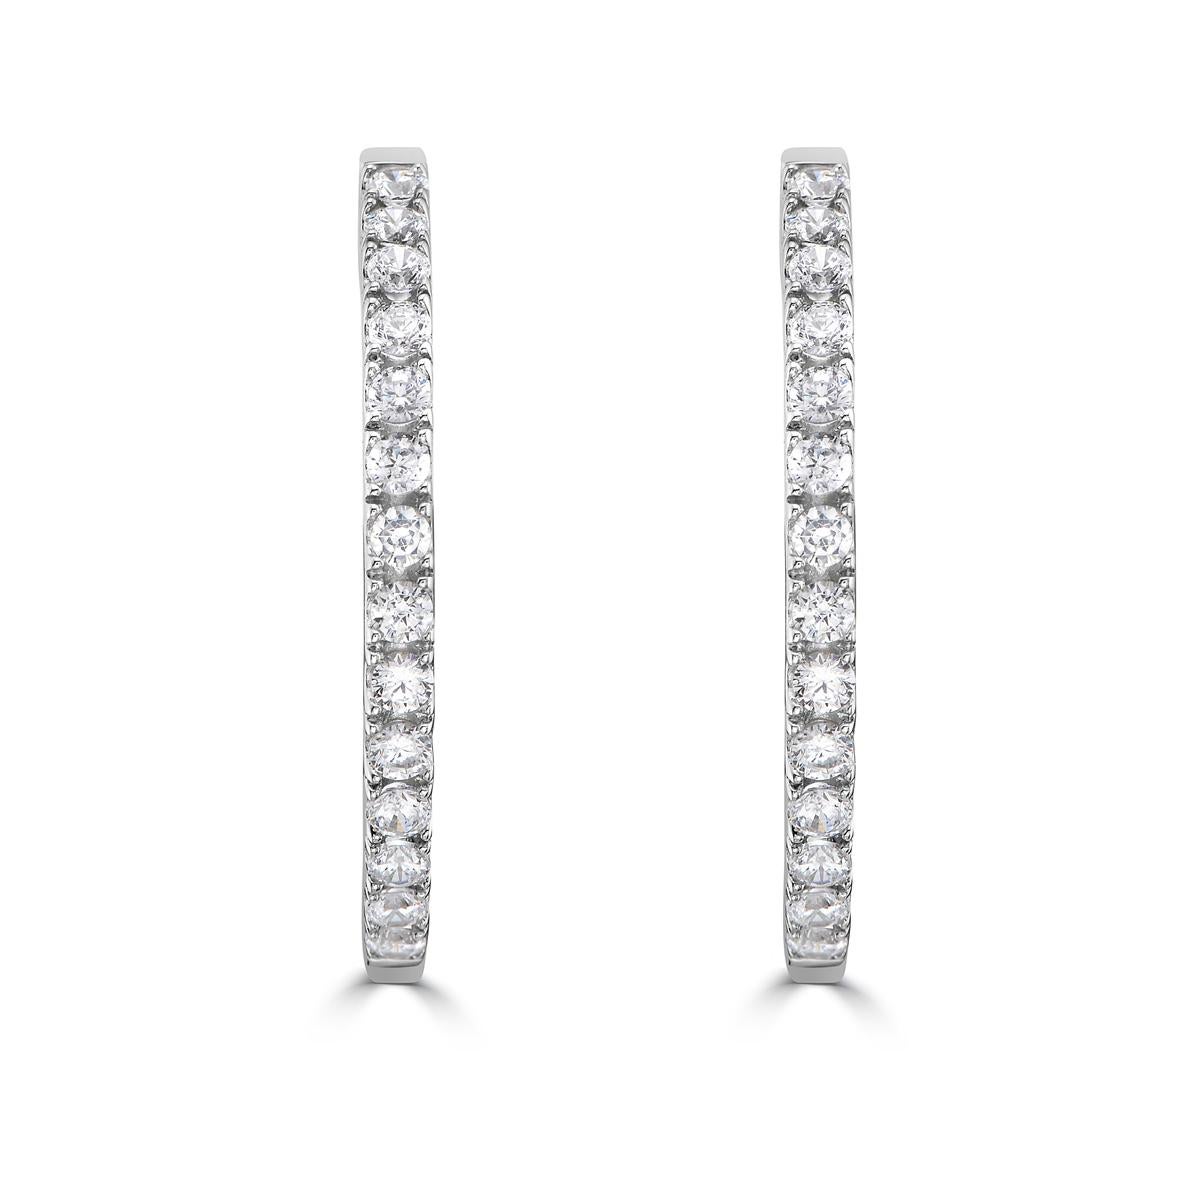 Elevate your everyday style with this diamond and 14k gold hoop earrings. As the perfect piece to wear every day, these diamond hoops are an Essential for your jewelry collection. These hoops are a classic design with standout diamonds that give an